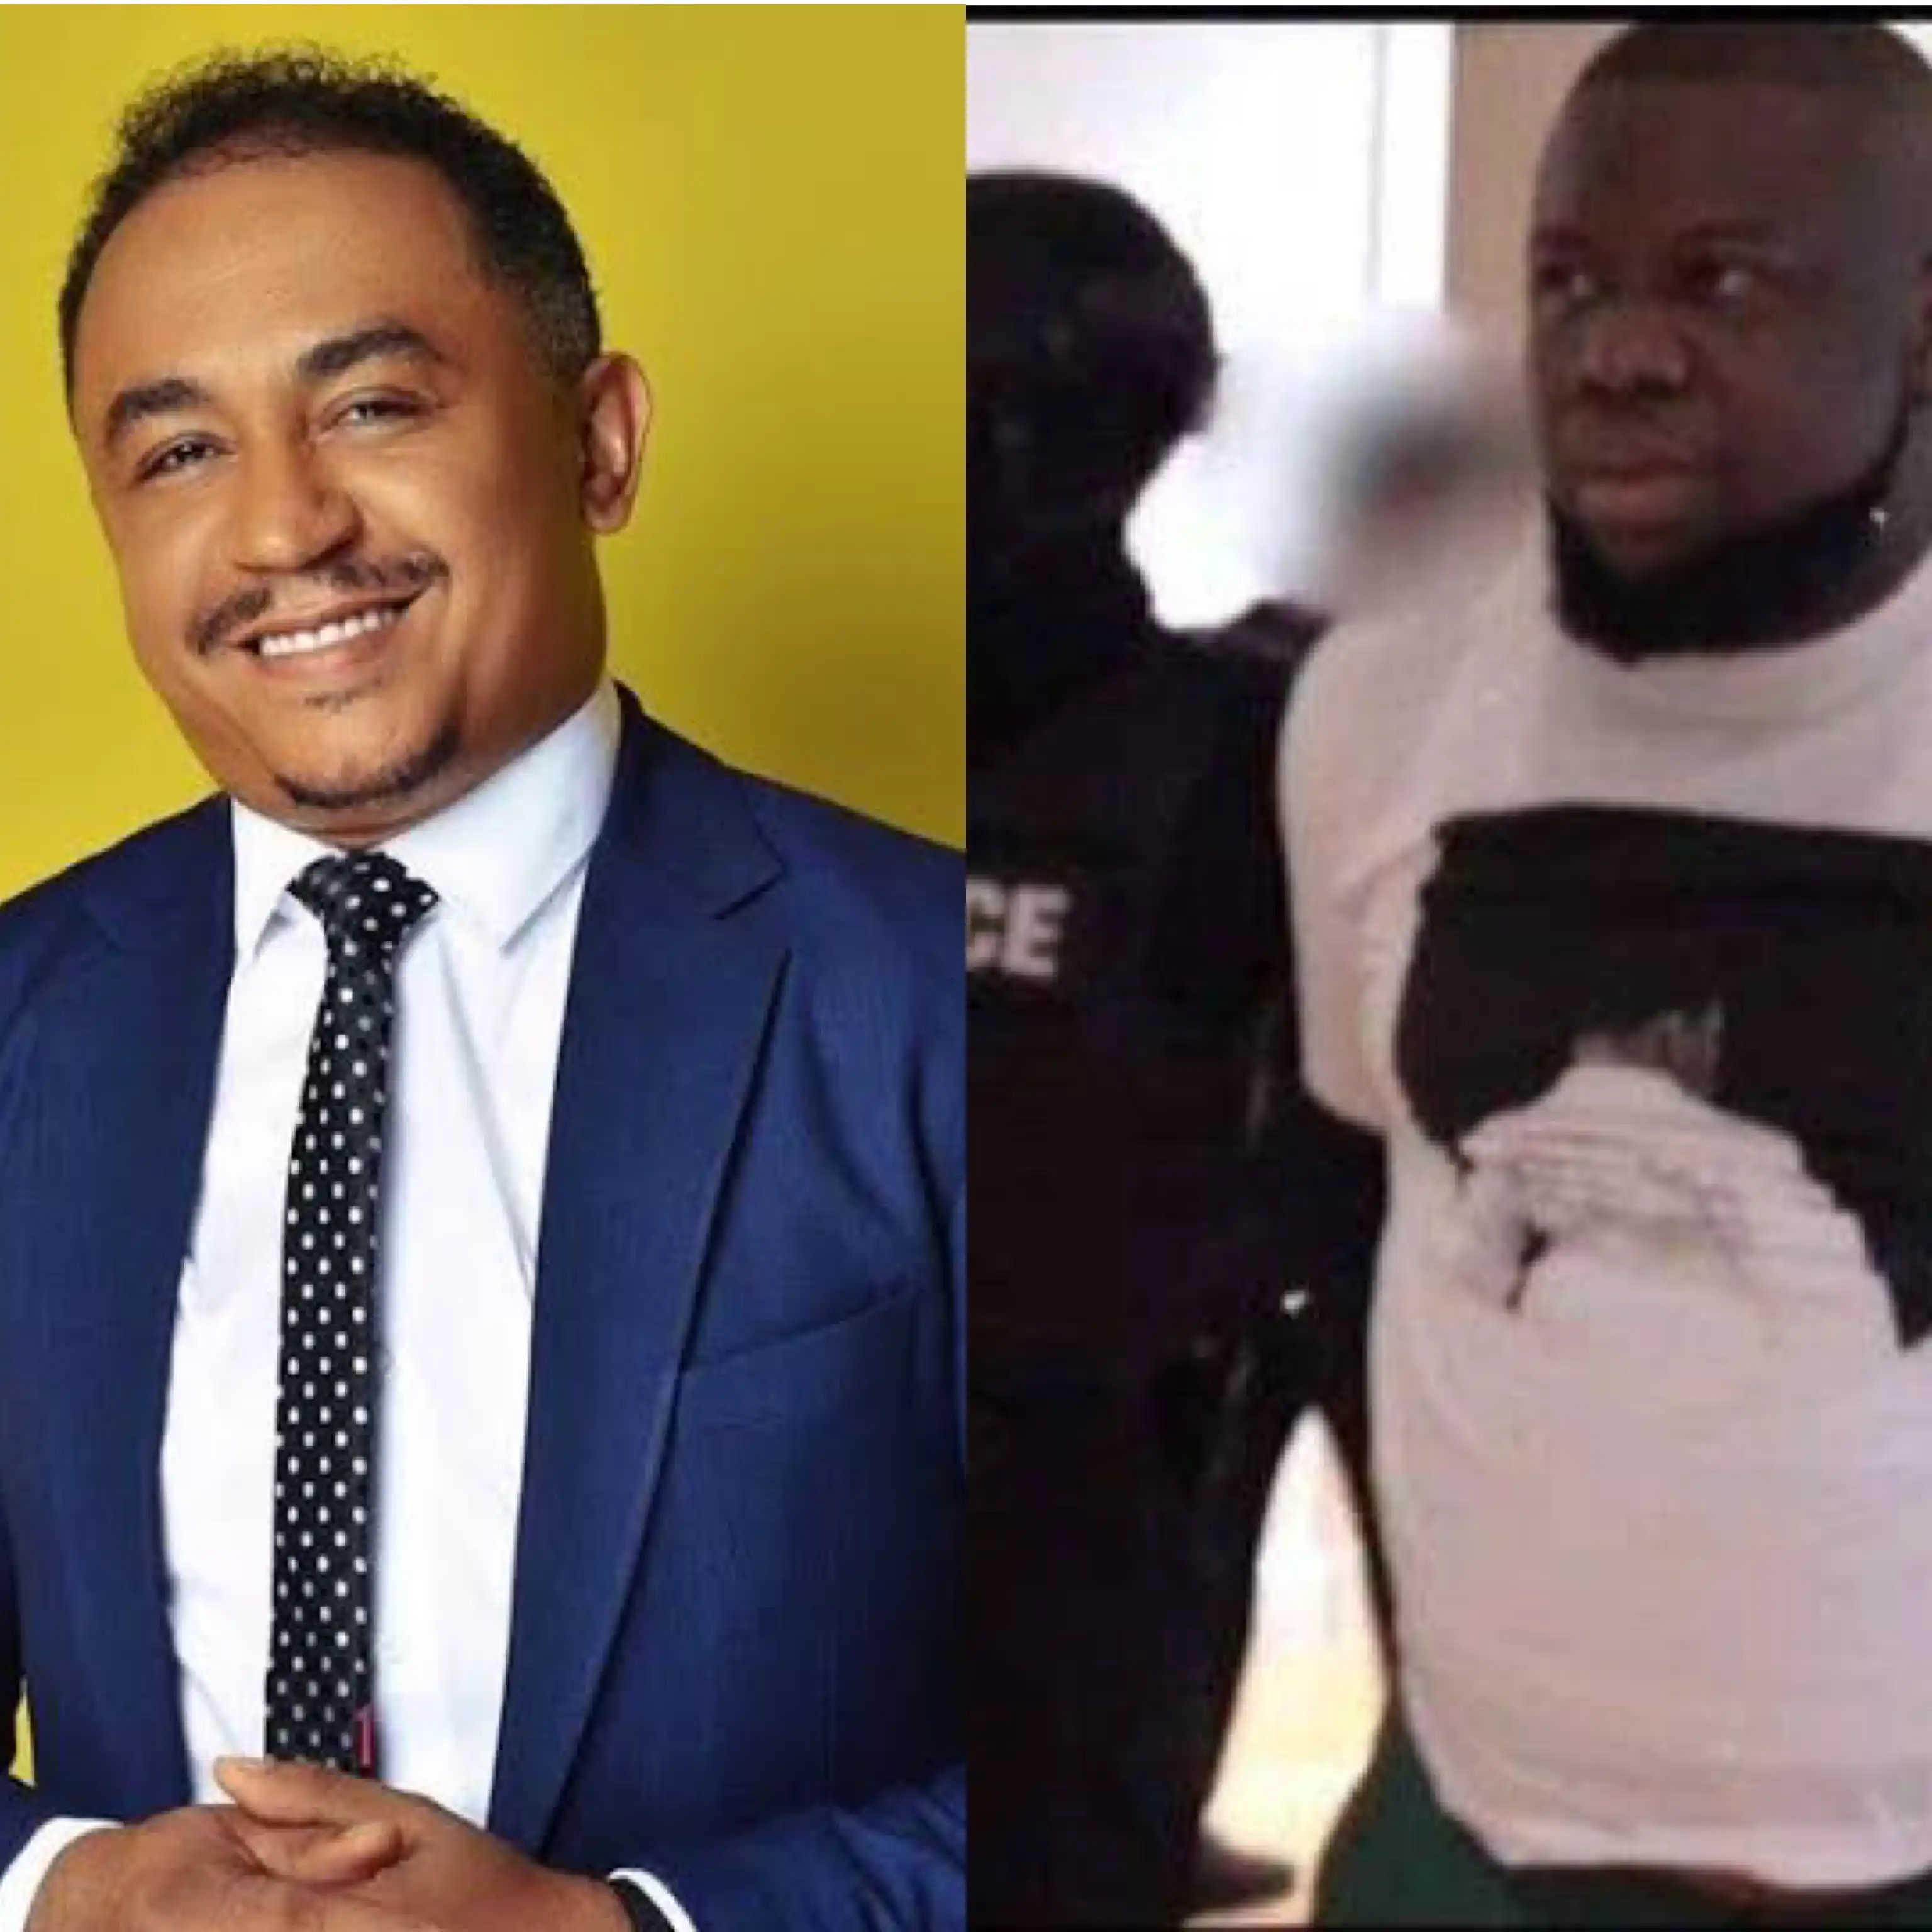 Hushpuppi told me he is an influencer and he never did anything suspicious around me - Daddy Freeze fires back at critics again (video)